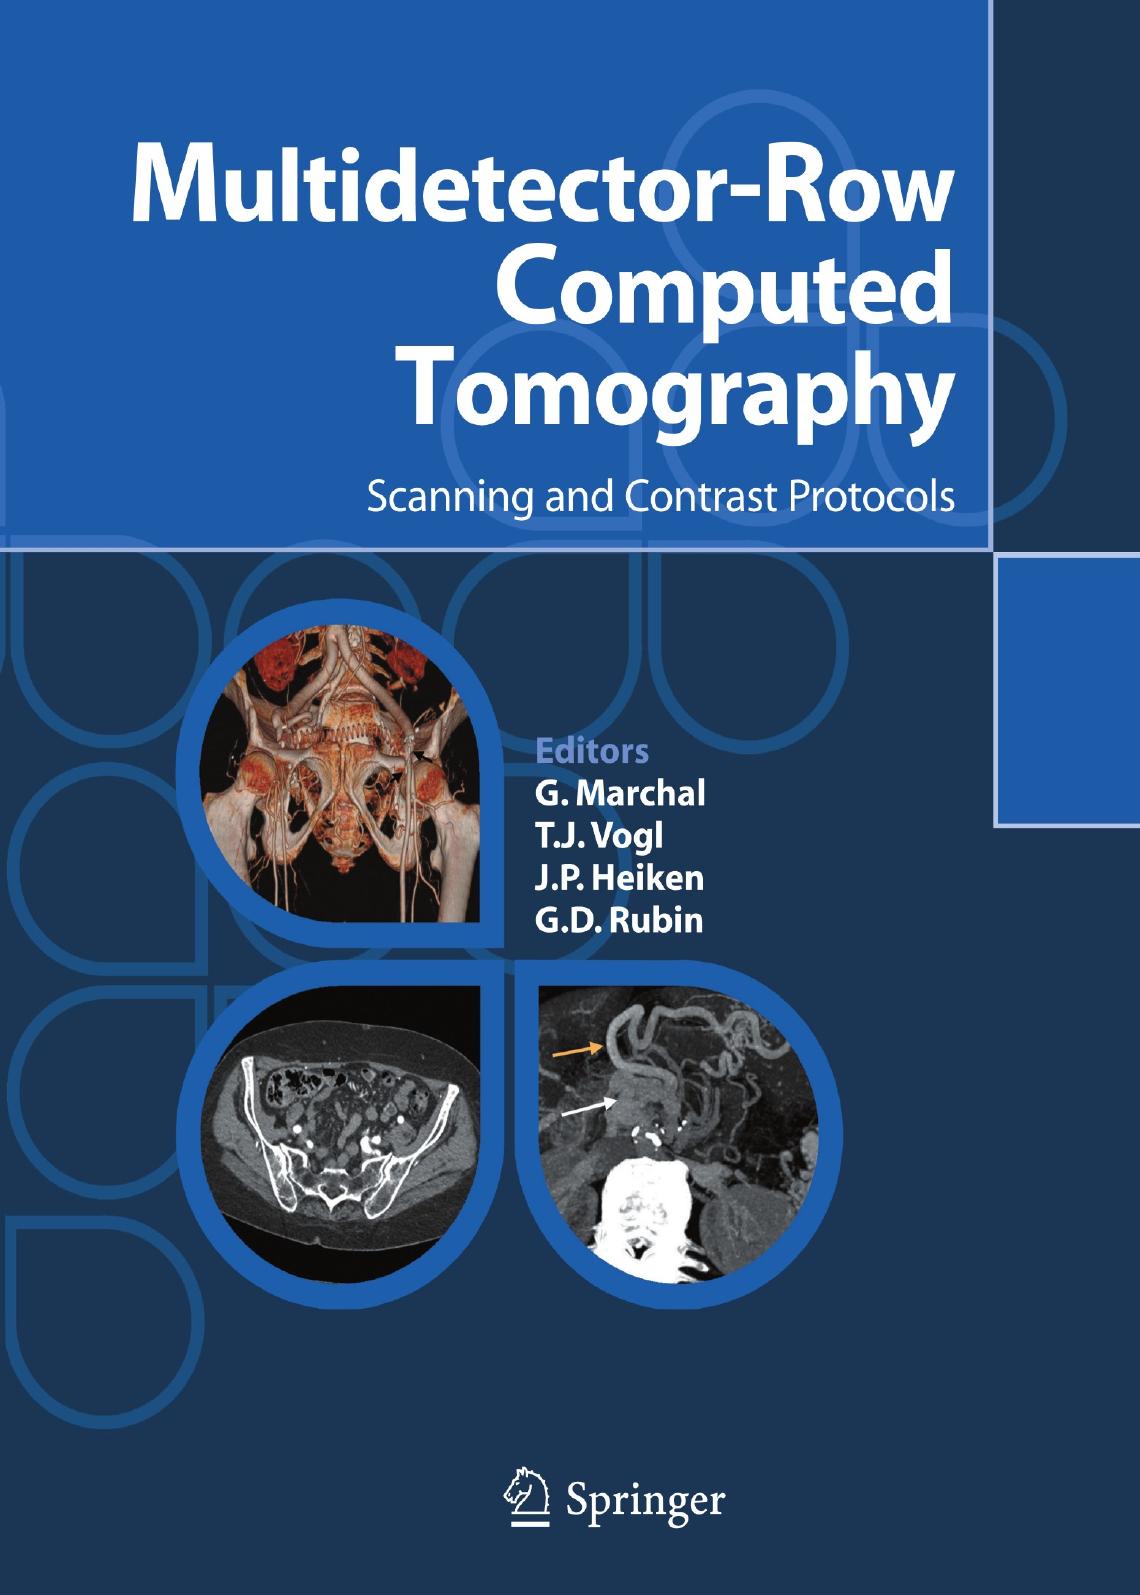 Multidetector-Row Computed Tomography  Scanning and Contrast Protocols ( PDFDrive.com )